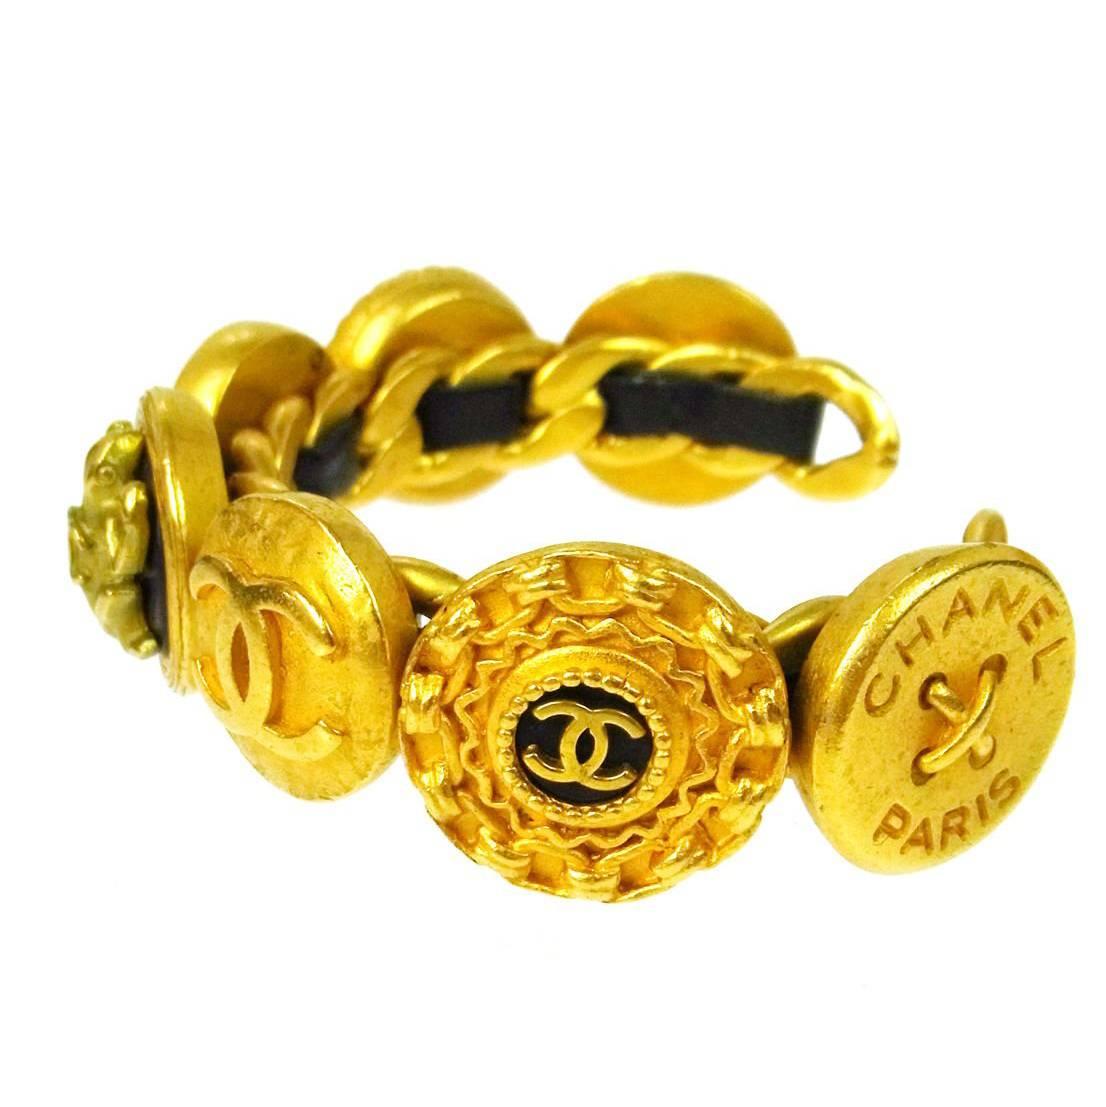 Chanel Vintage Rare Gold Black Leather Cameo Charm Cuff Bracelet in Box